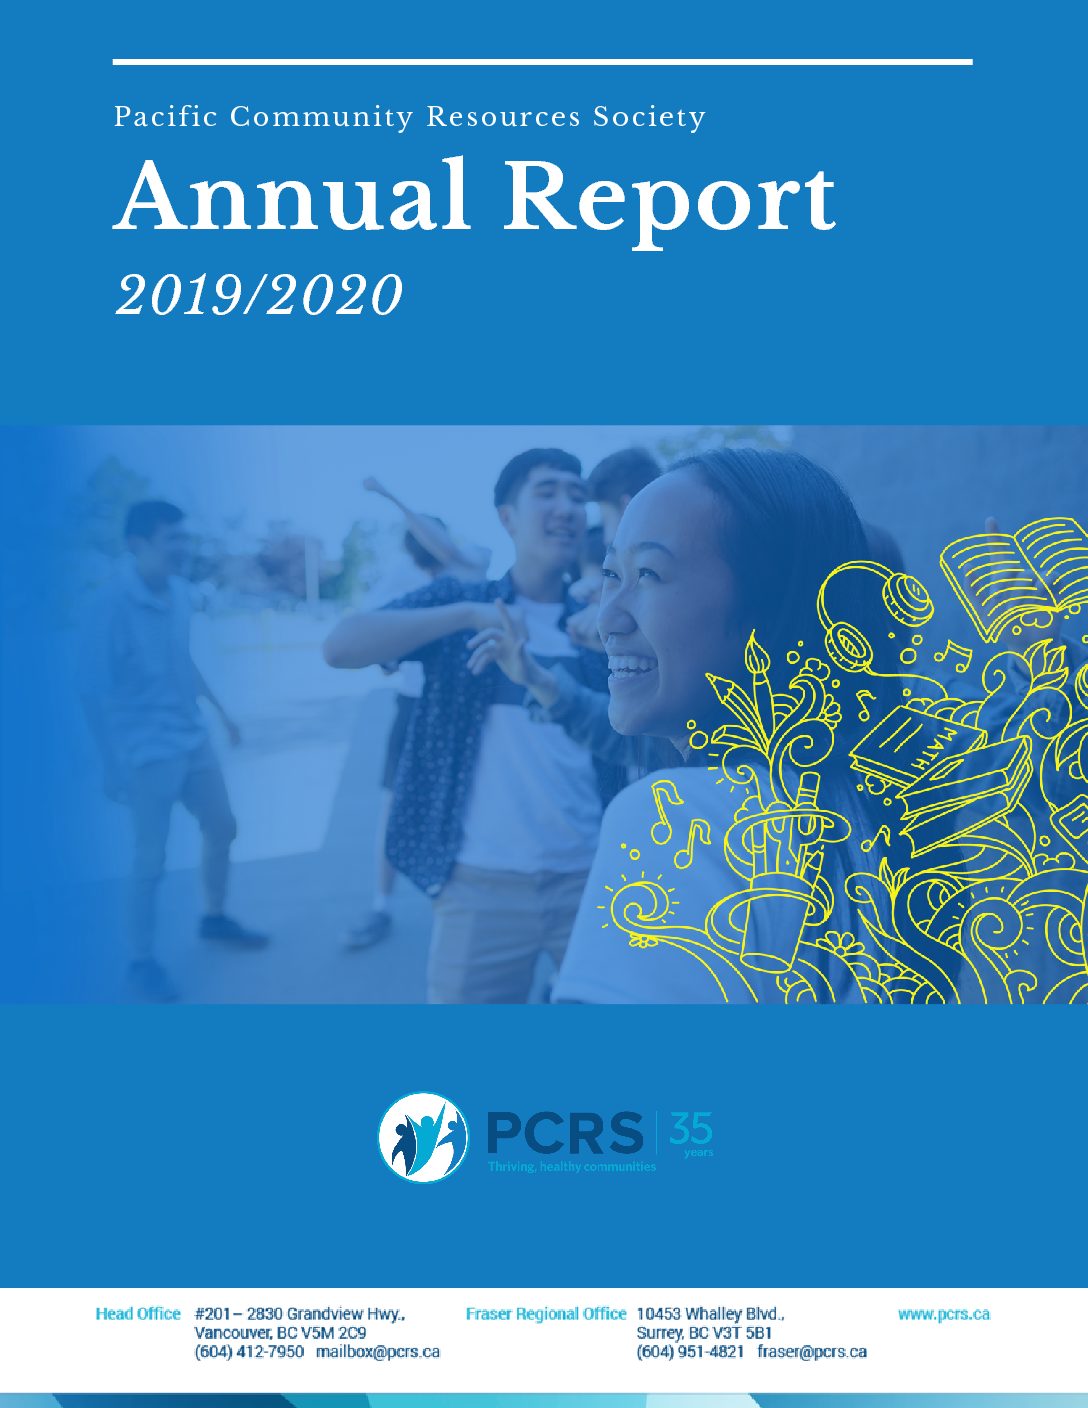 Download PCRS - Annual Report - 2020 | Pacific Community Resources Society